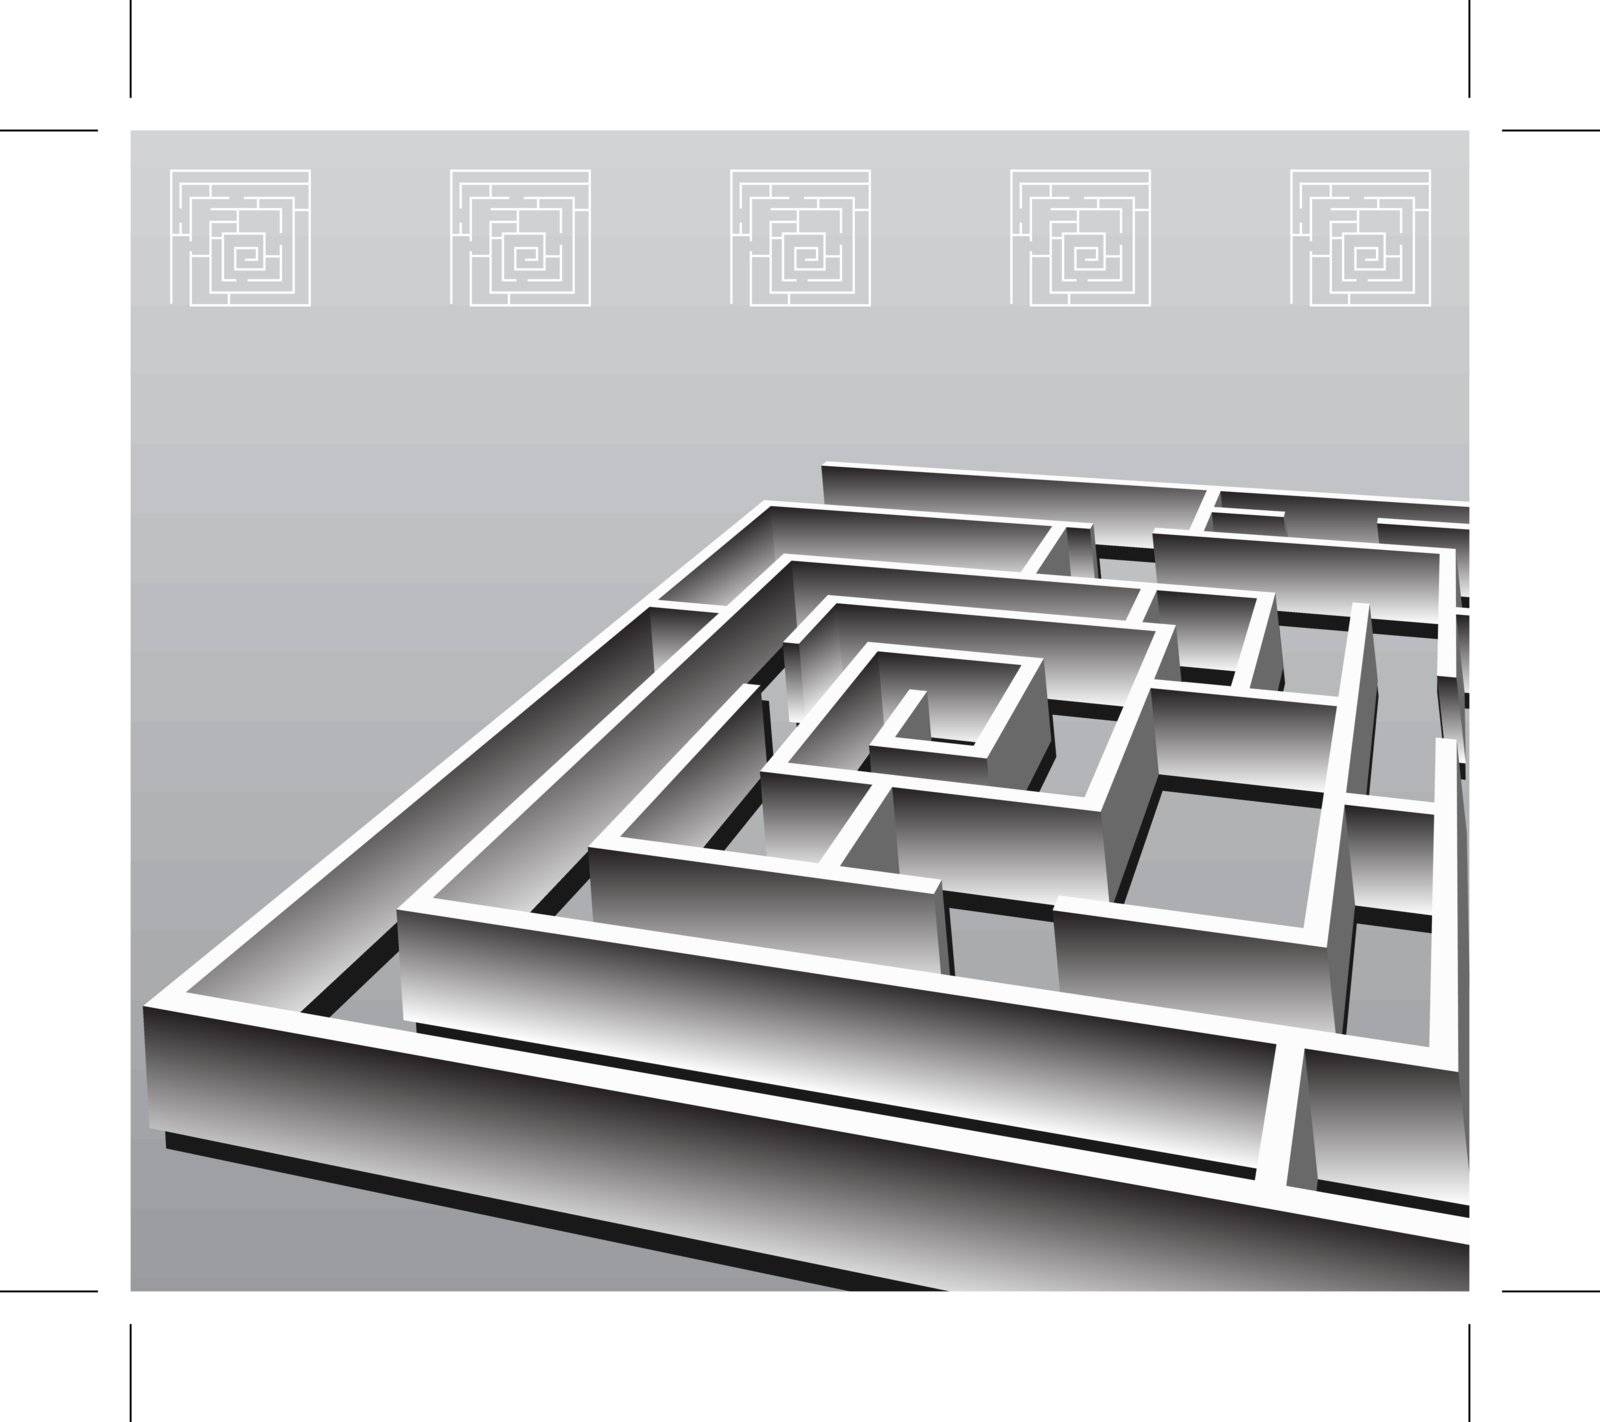 Square Maze by cteconsulting